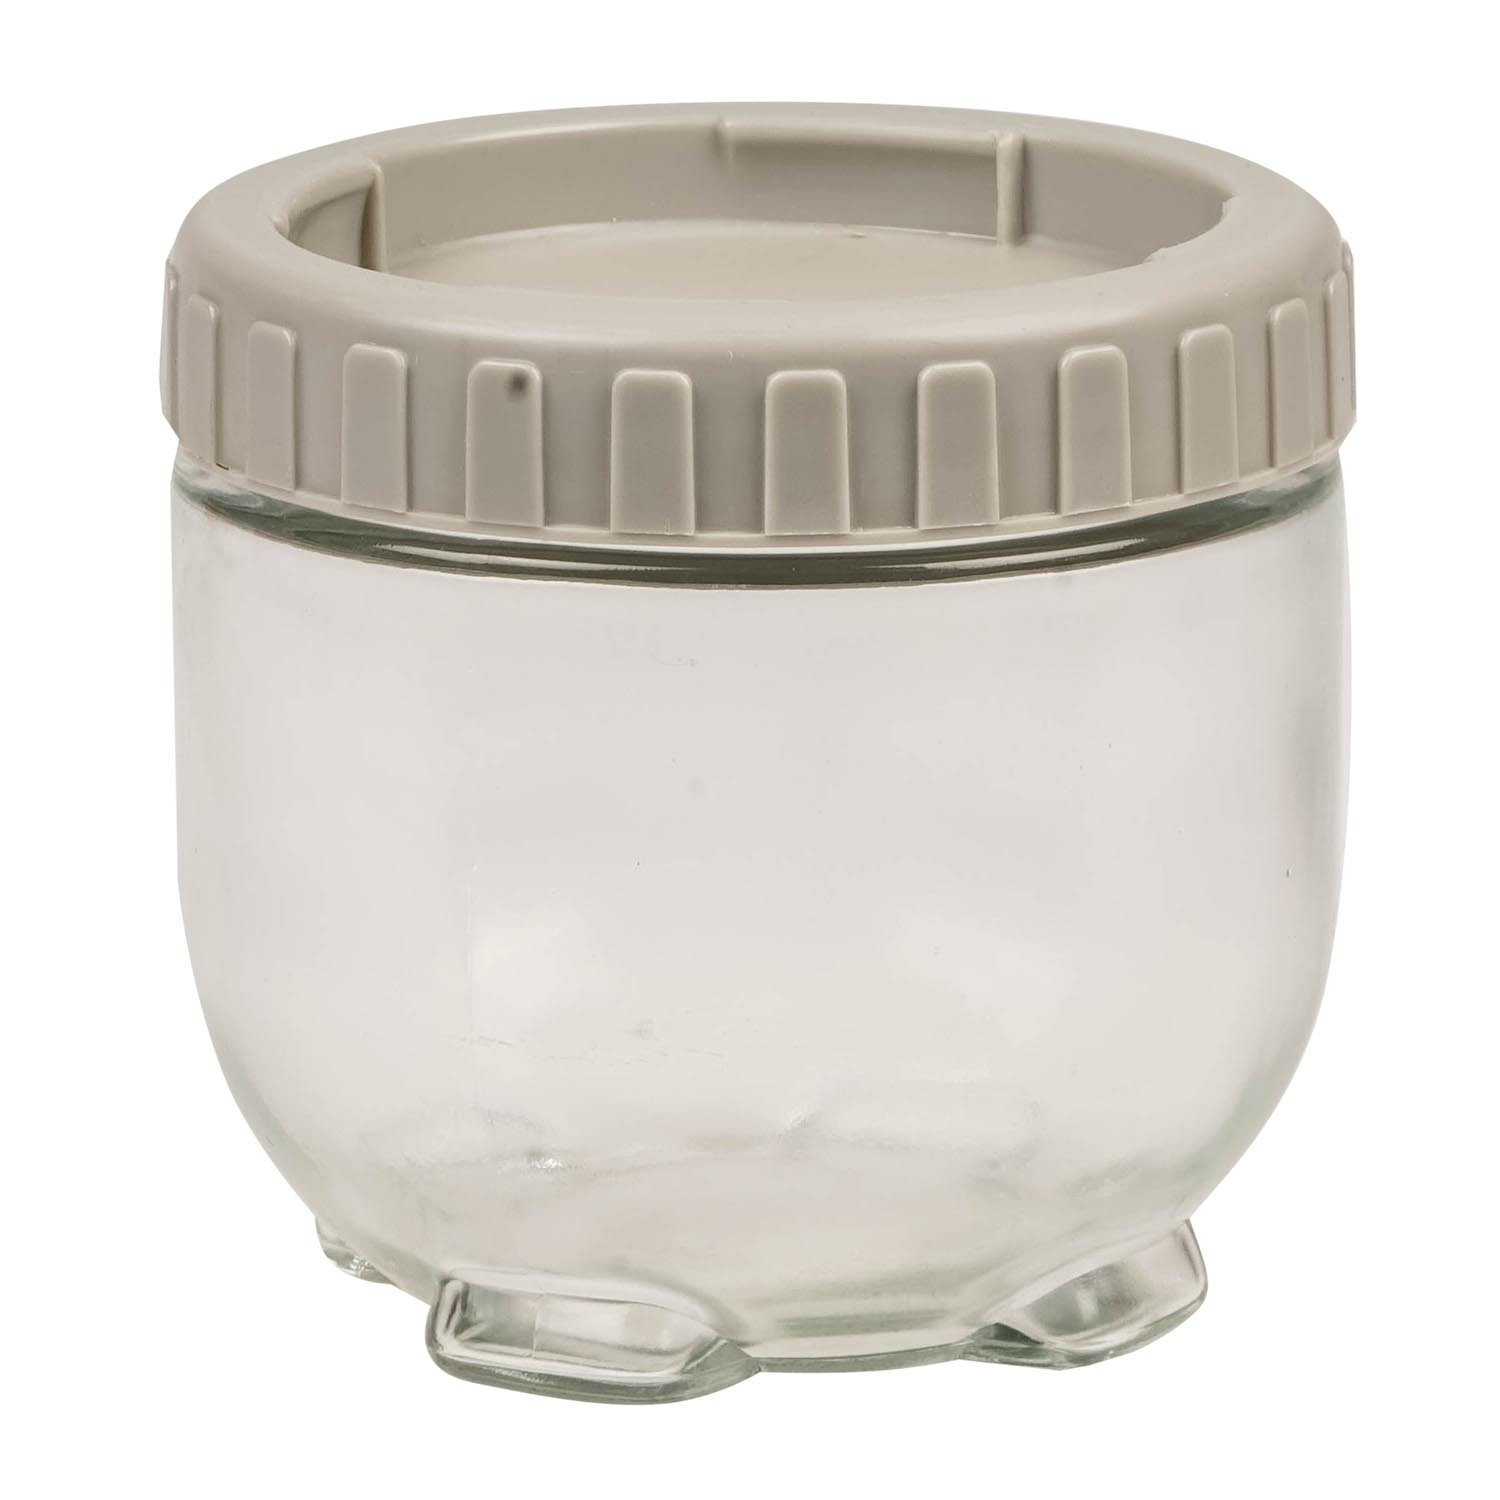 450ml Glass Jar with Lock Function Lid Image